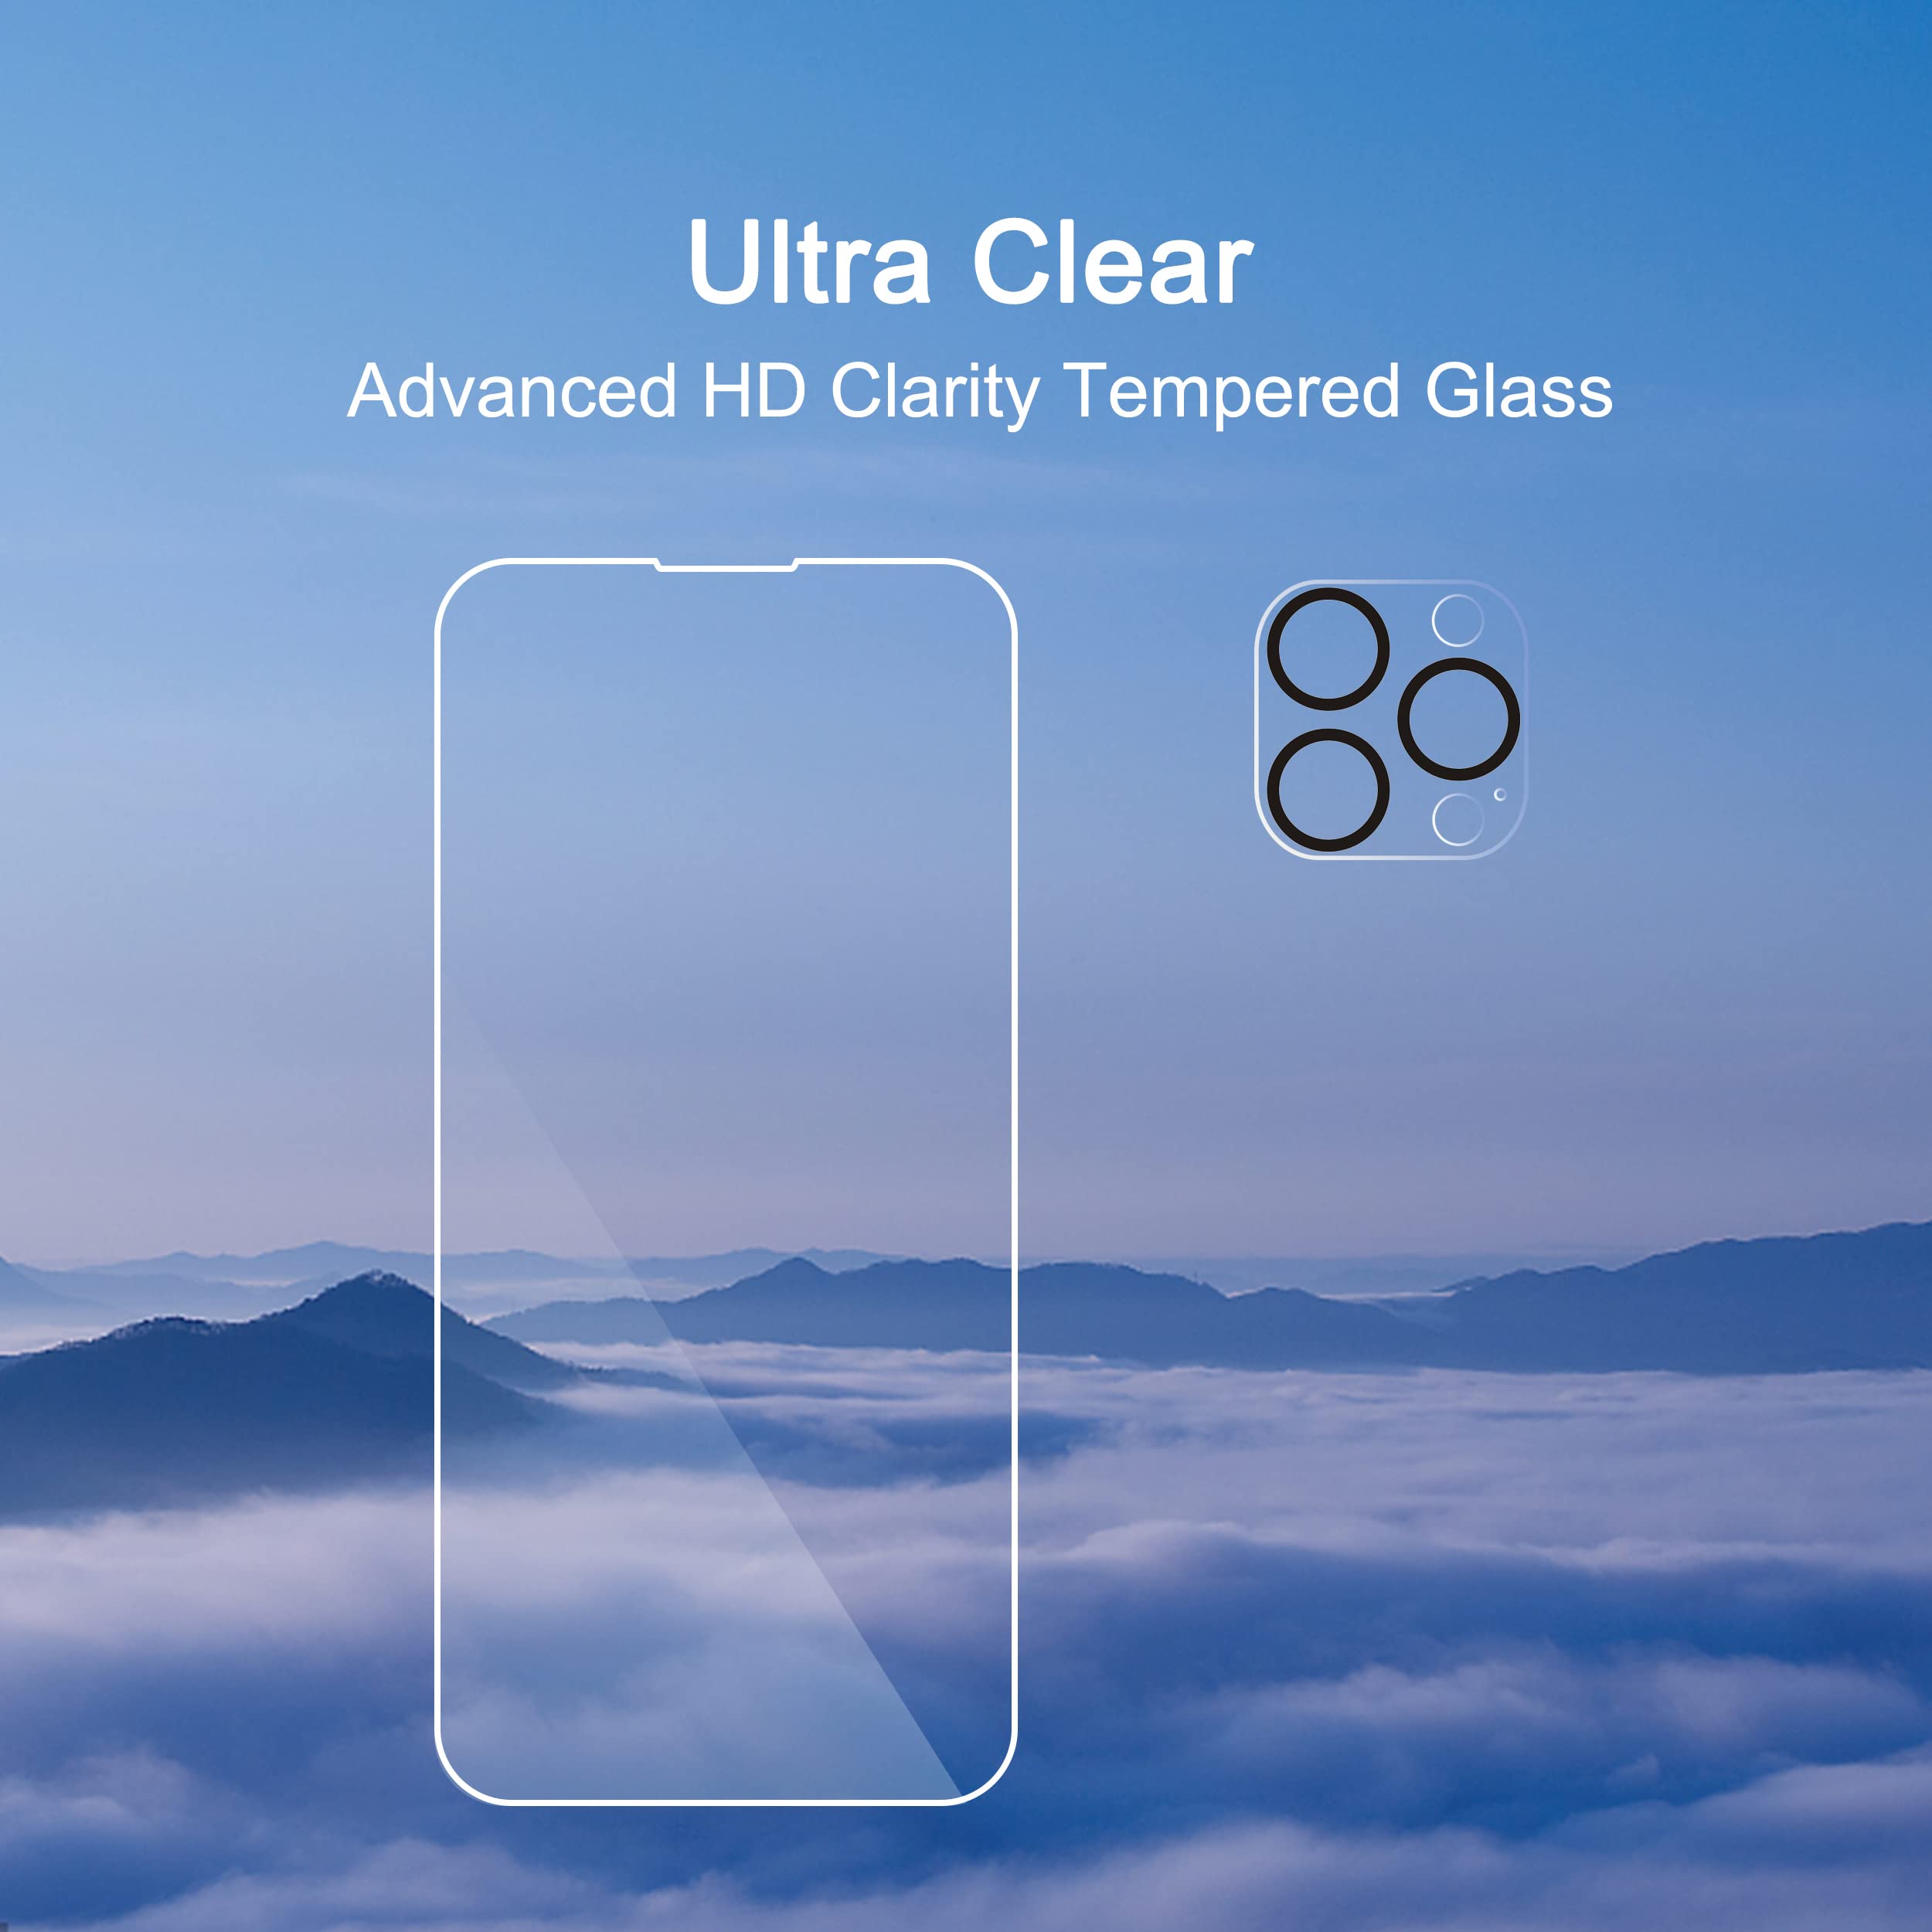 Ailun 3 Pack Screen Protector for iPhone 14 Pro Max[6.7 inch] + 3 Pack Camera Lens Protector,Sensor Protection,Dynamic Island Compatible,Case Friendly Tempered Glass Film,[9H Hardness] - HD